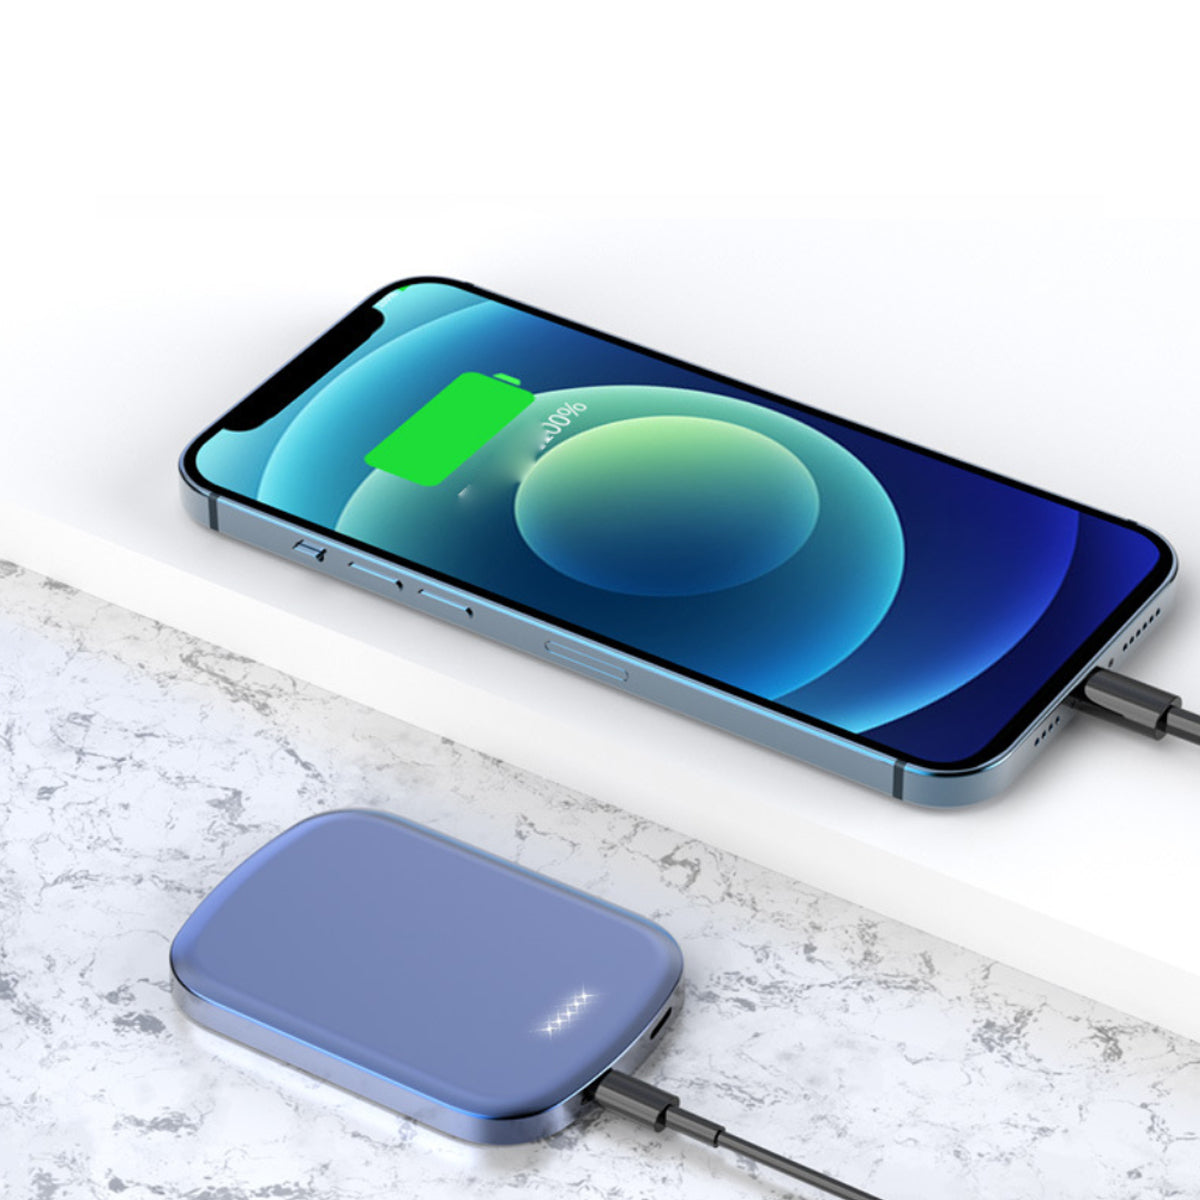 Chargomate Magnetic Portable Wireless Charger And Power Bank For Apple And Android - 13208311_large_2ad04d8b-0be5-4392-8322-247ddfb6a53f